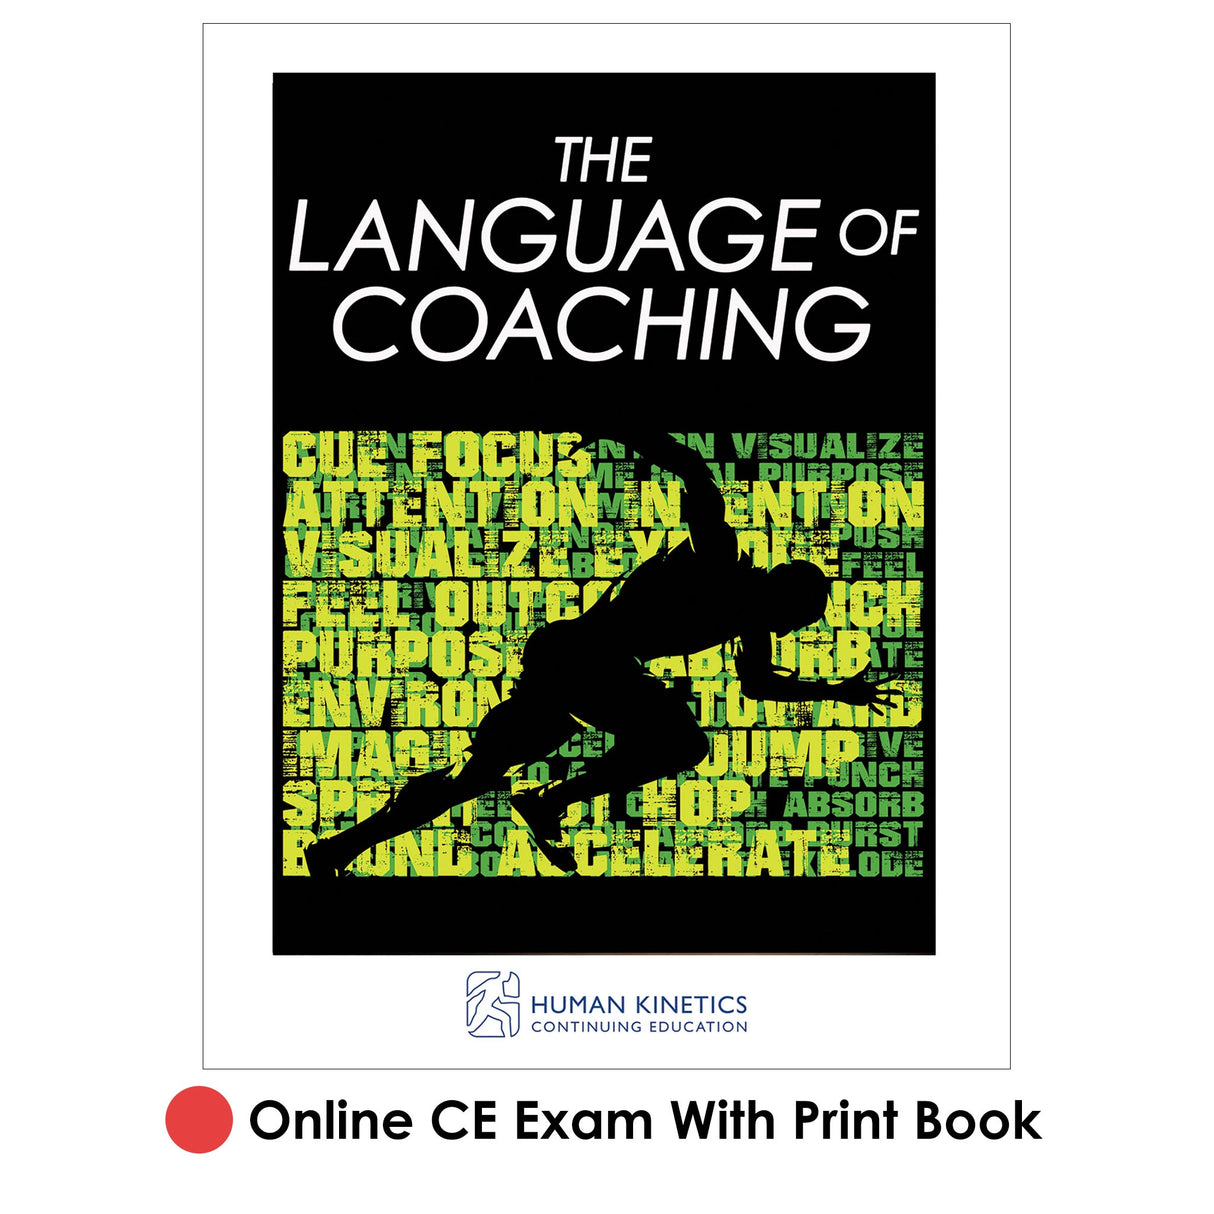 Language of Coaching Online CE Exam With Print Book, The